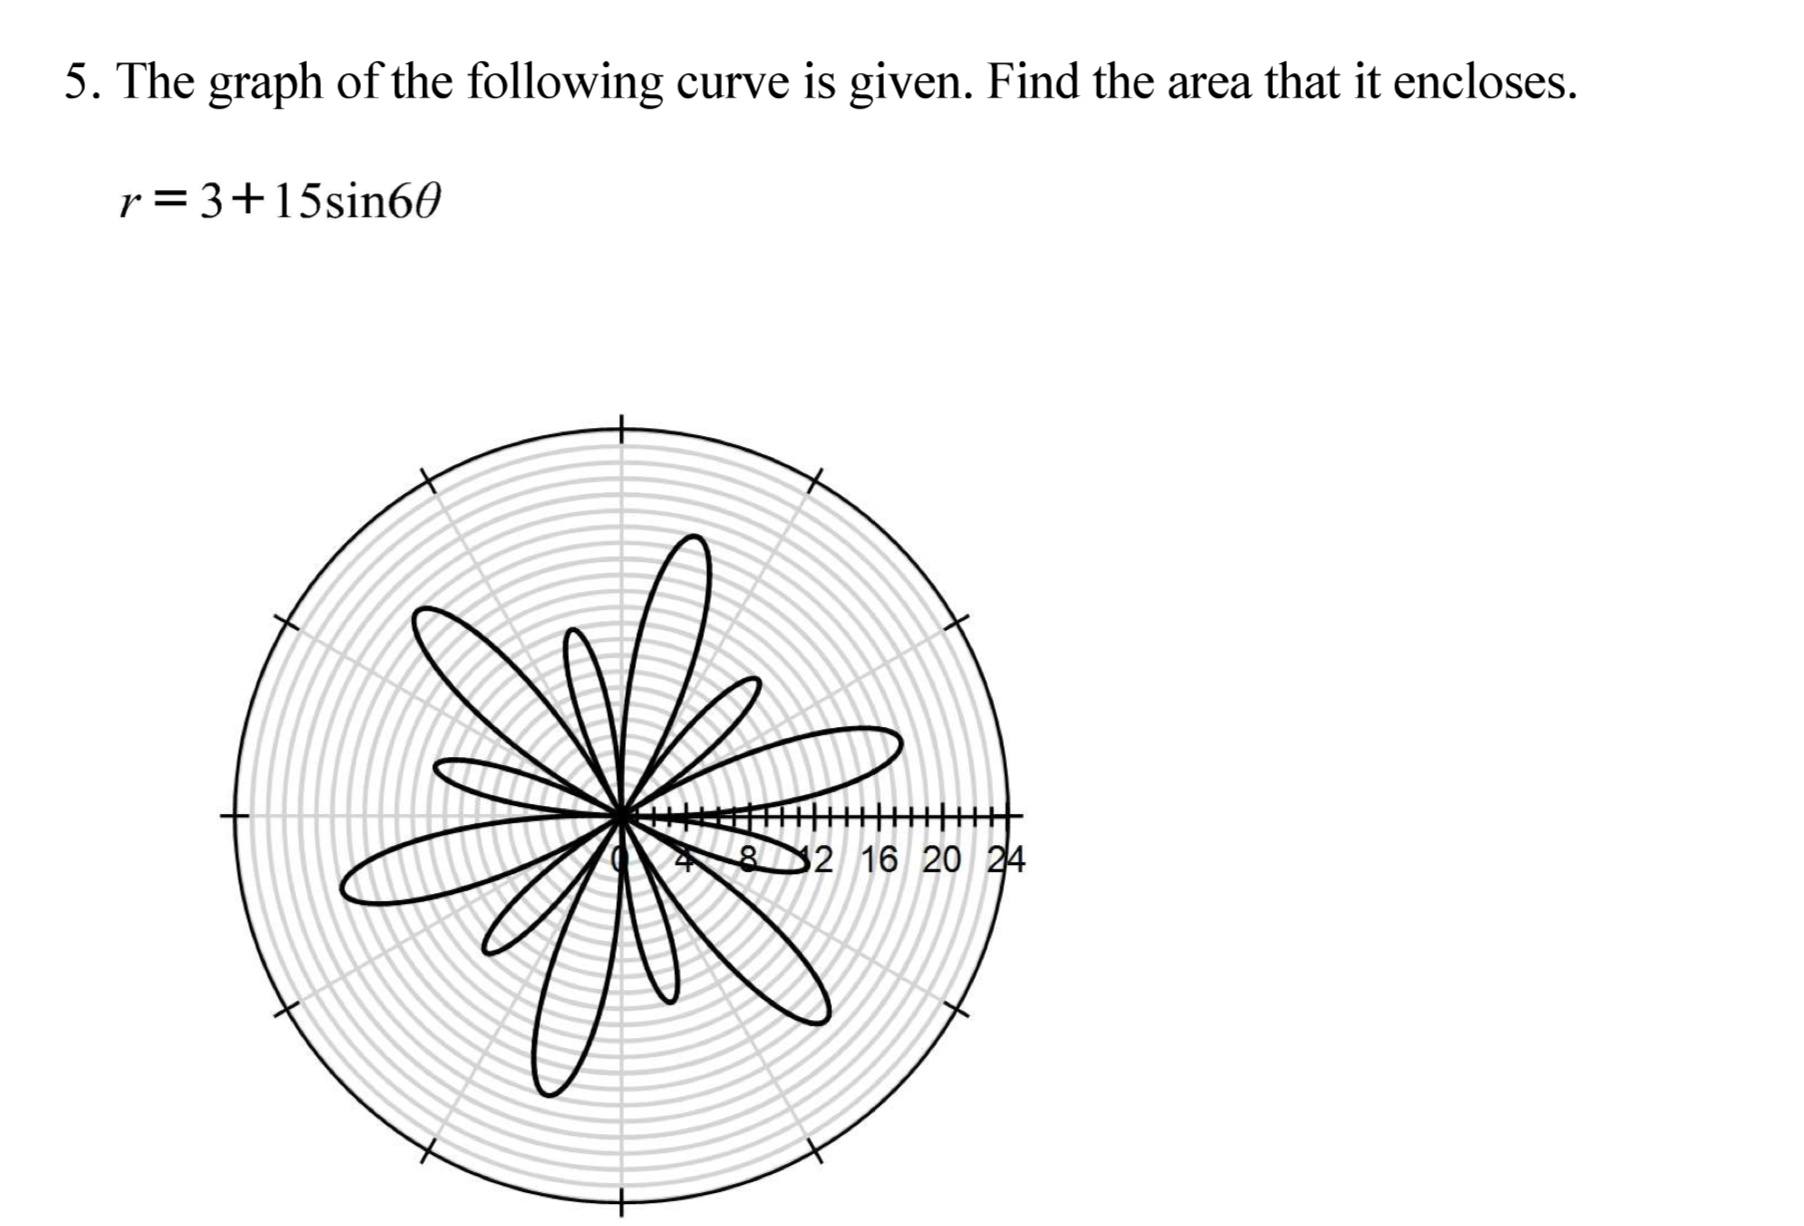 5. The graph of the following curve is given. Find the area that it encloses.
r=3+15sin60
82 16 20 24
